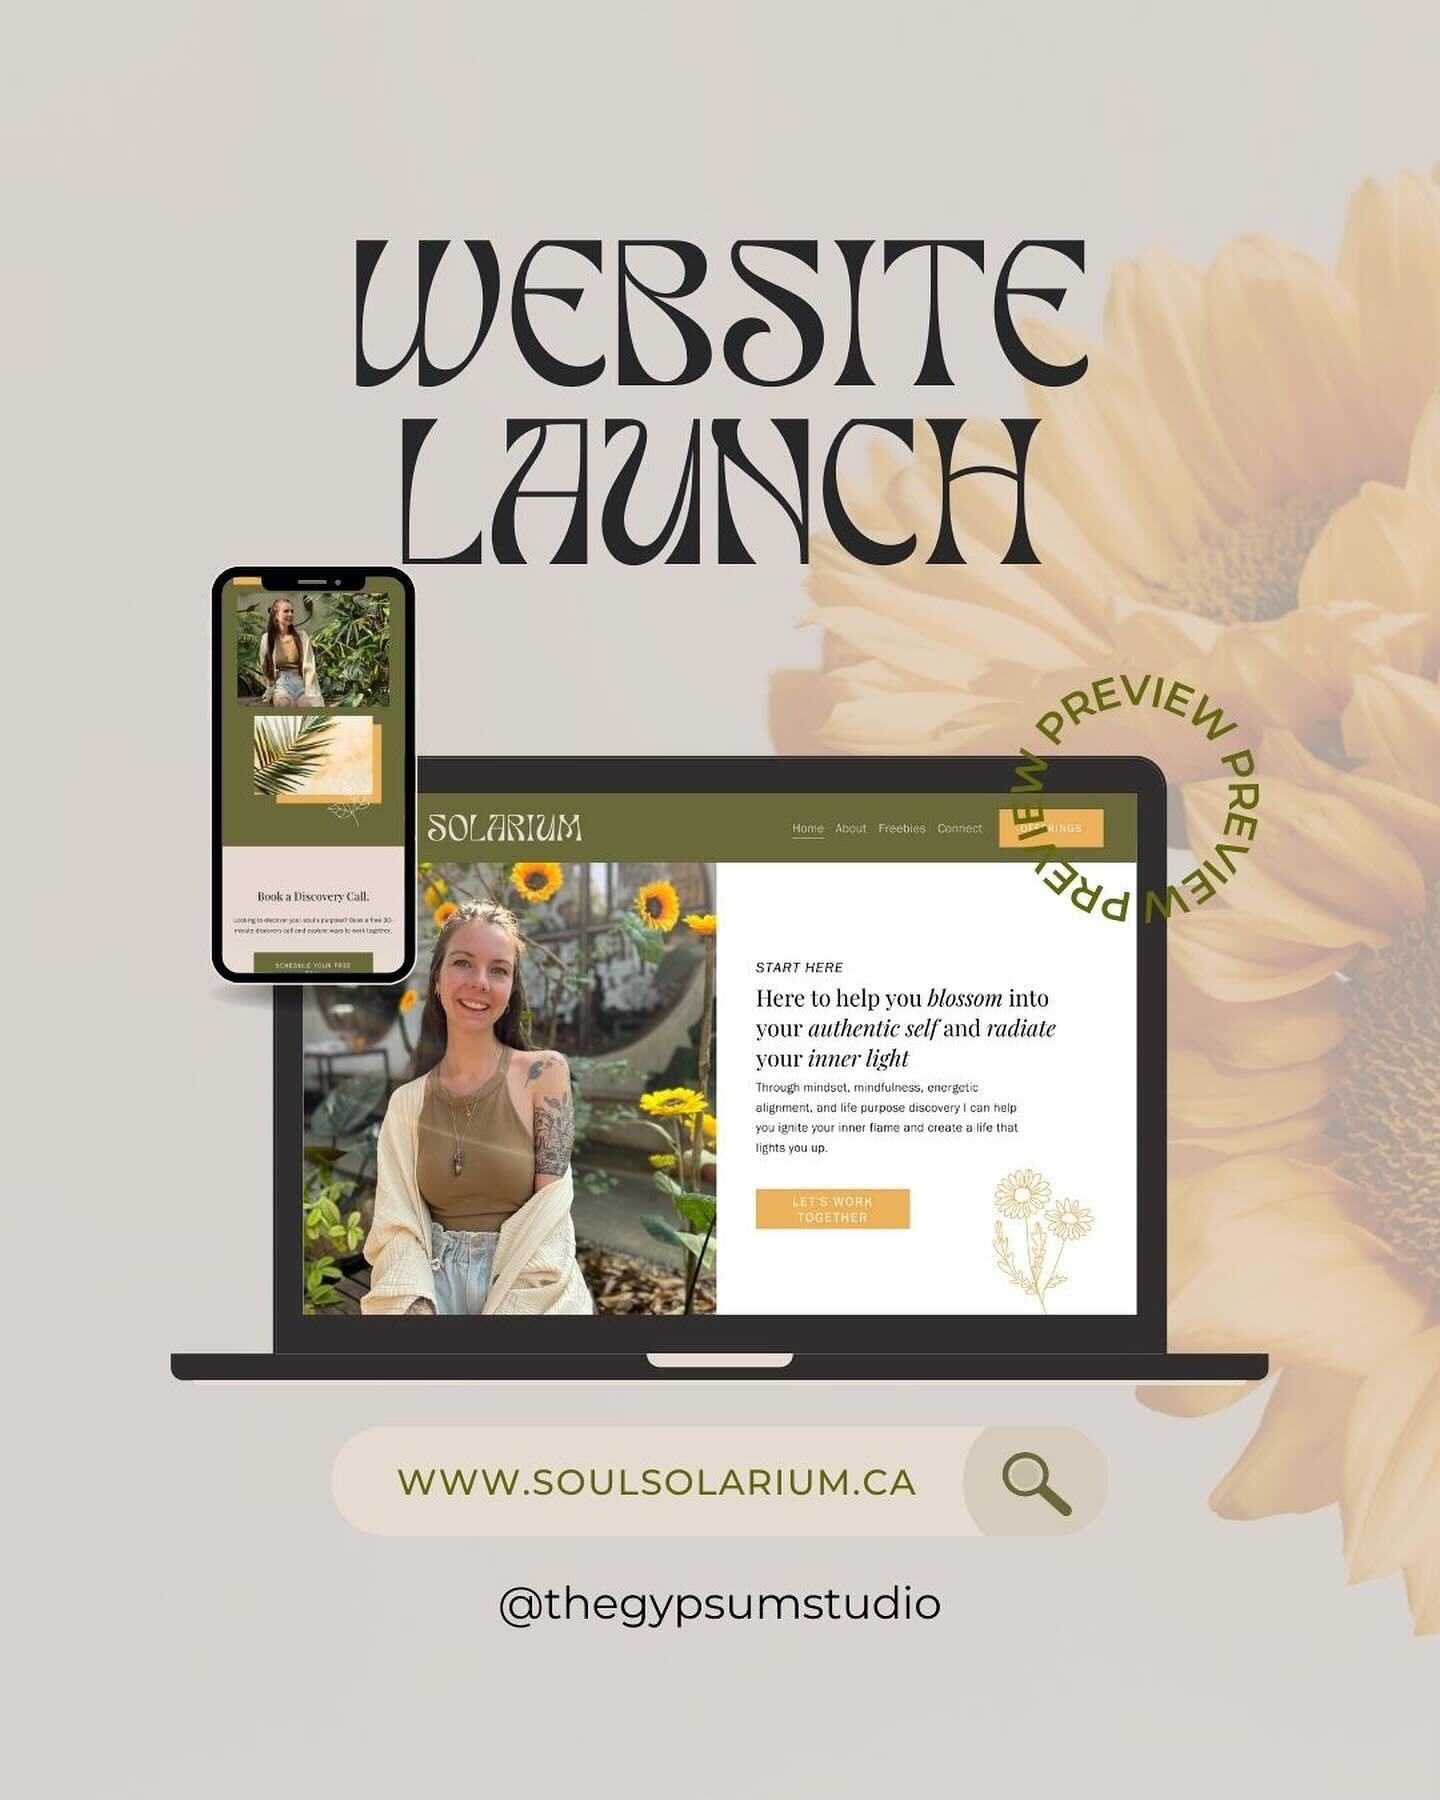 Client website launch! 🌻 Meet JoJo of Soul Solarium&ndash;Spiritual Life Coaching and Soul Purpose Discovery. 

Here to help you blossom into your authentic self and radiate your inner light through mindfulness, energetic alignment, and life purpose